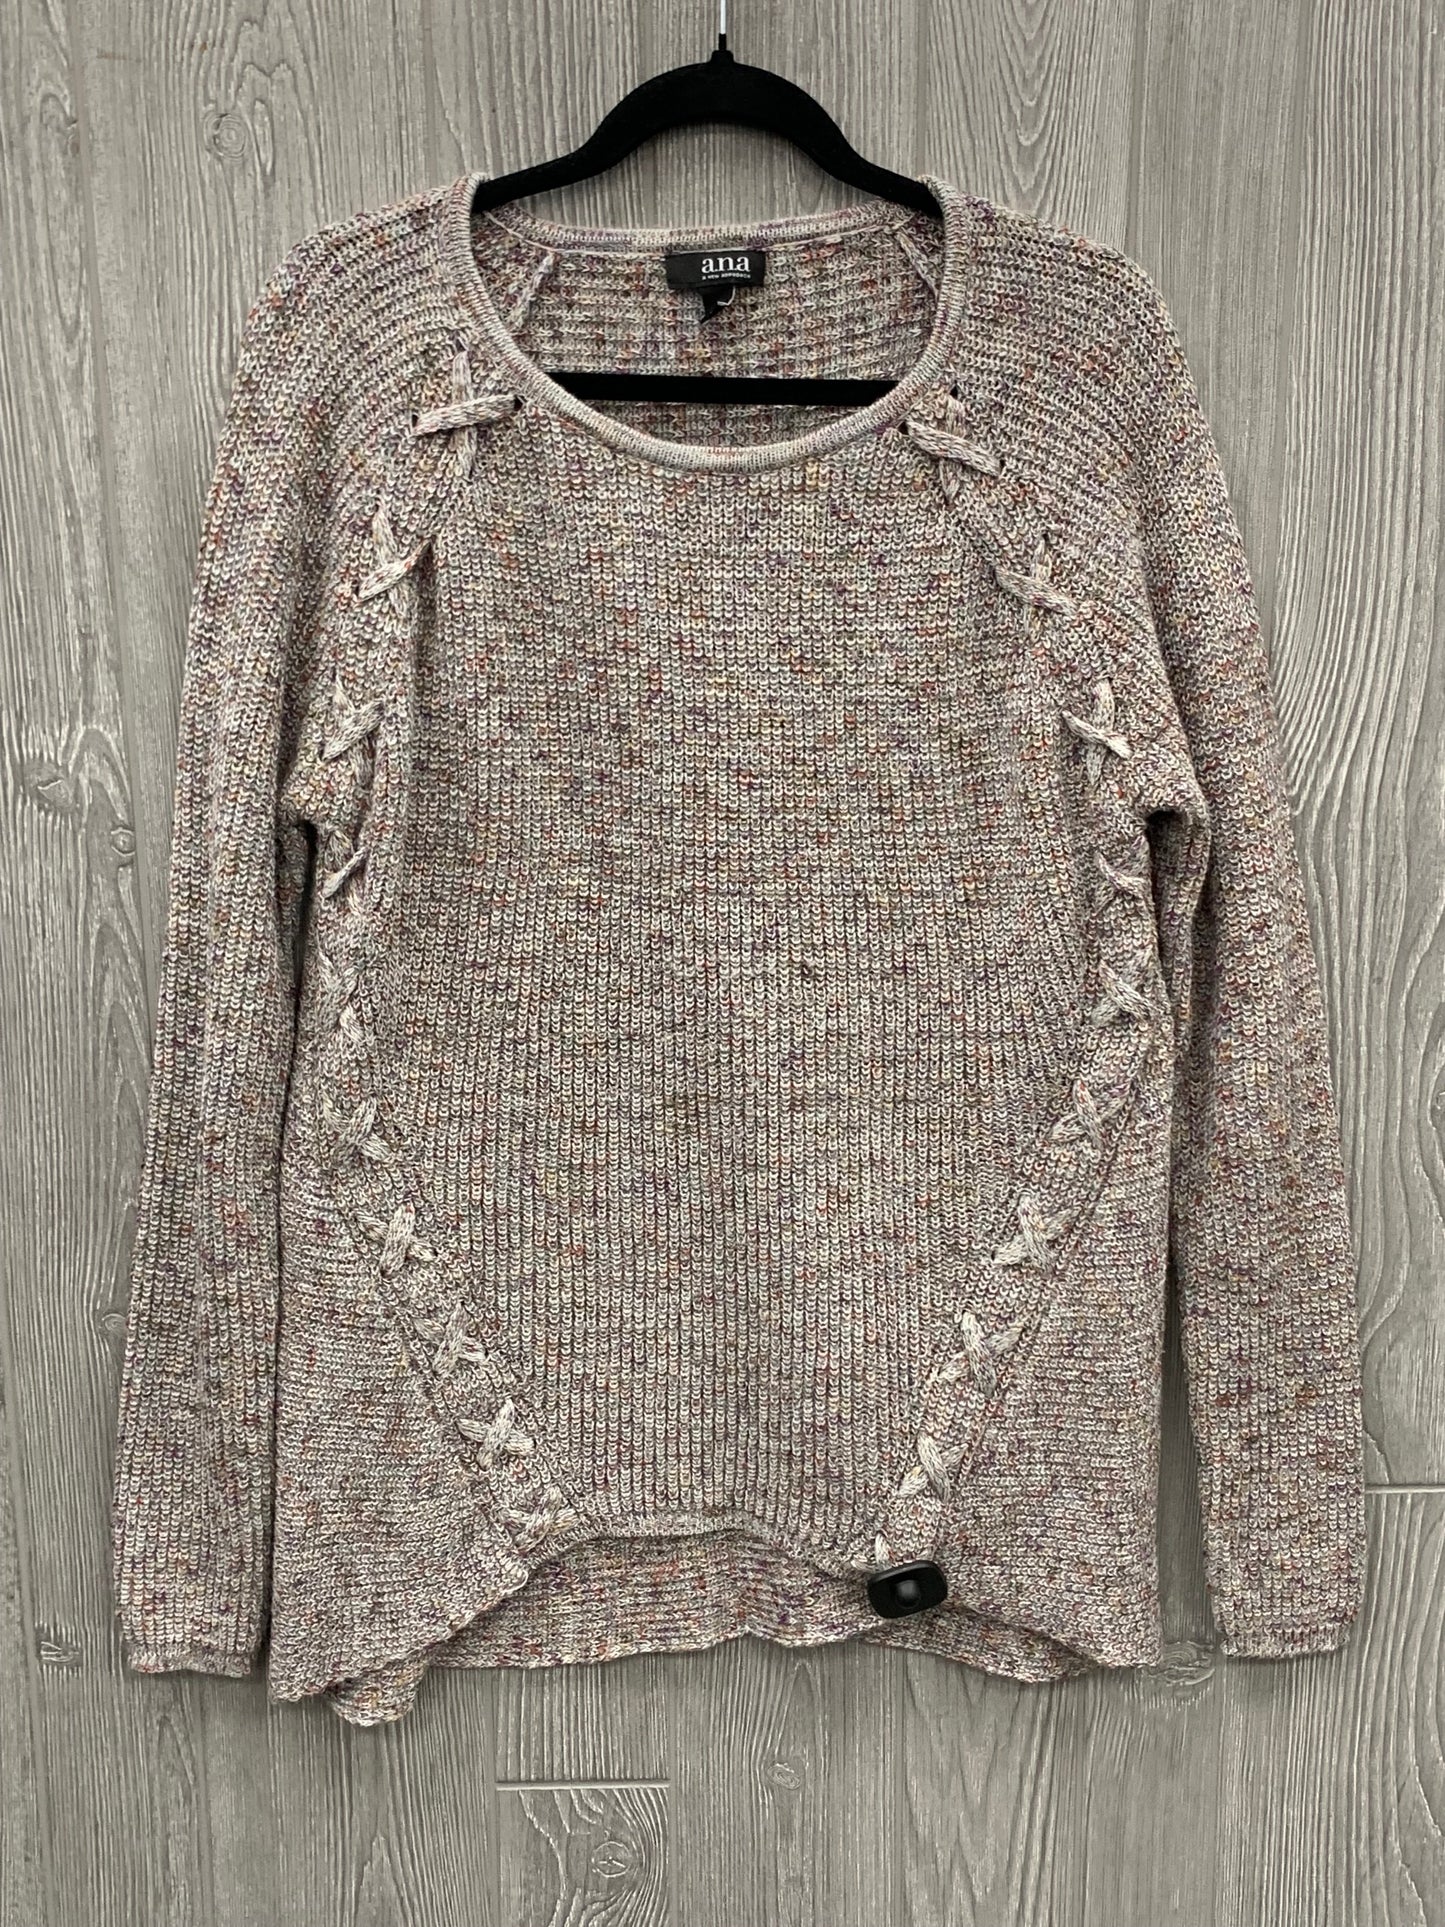 Sweater By Ana  Size: L